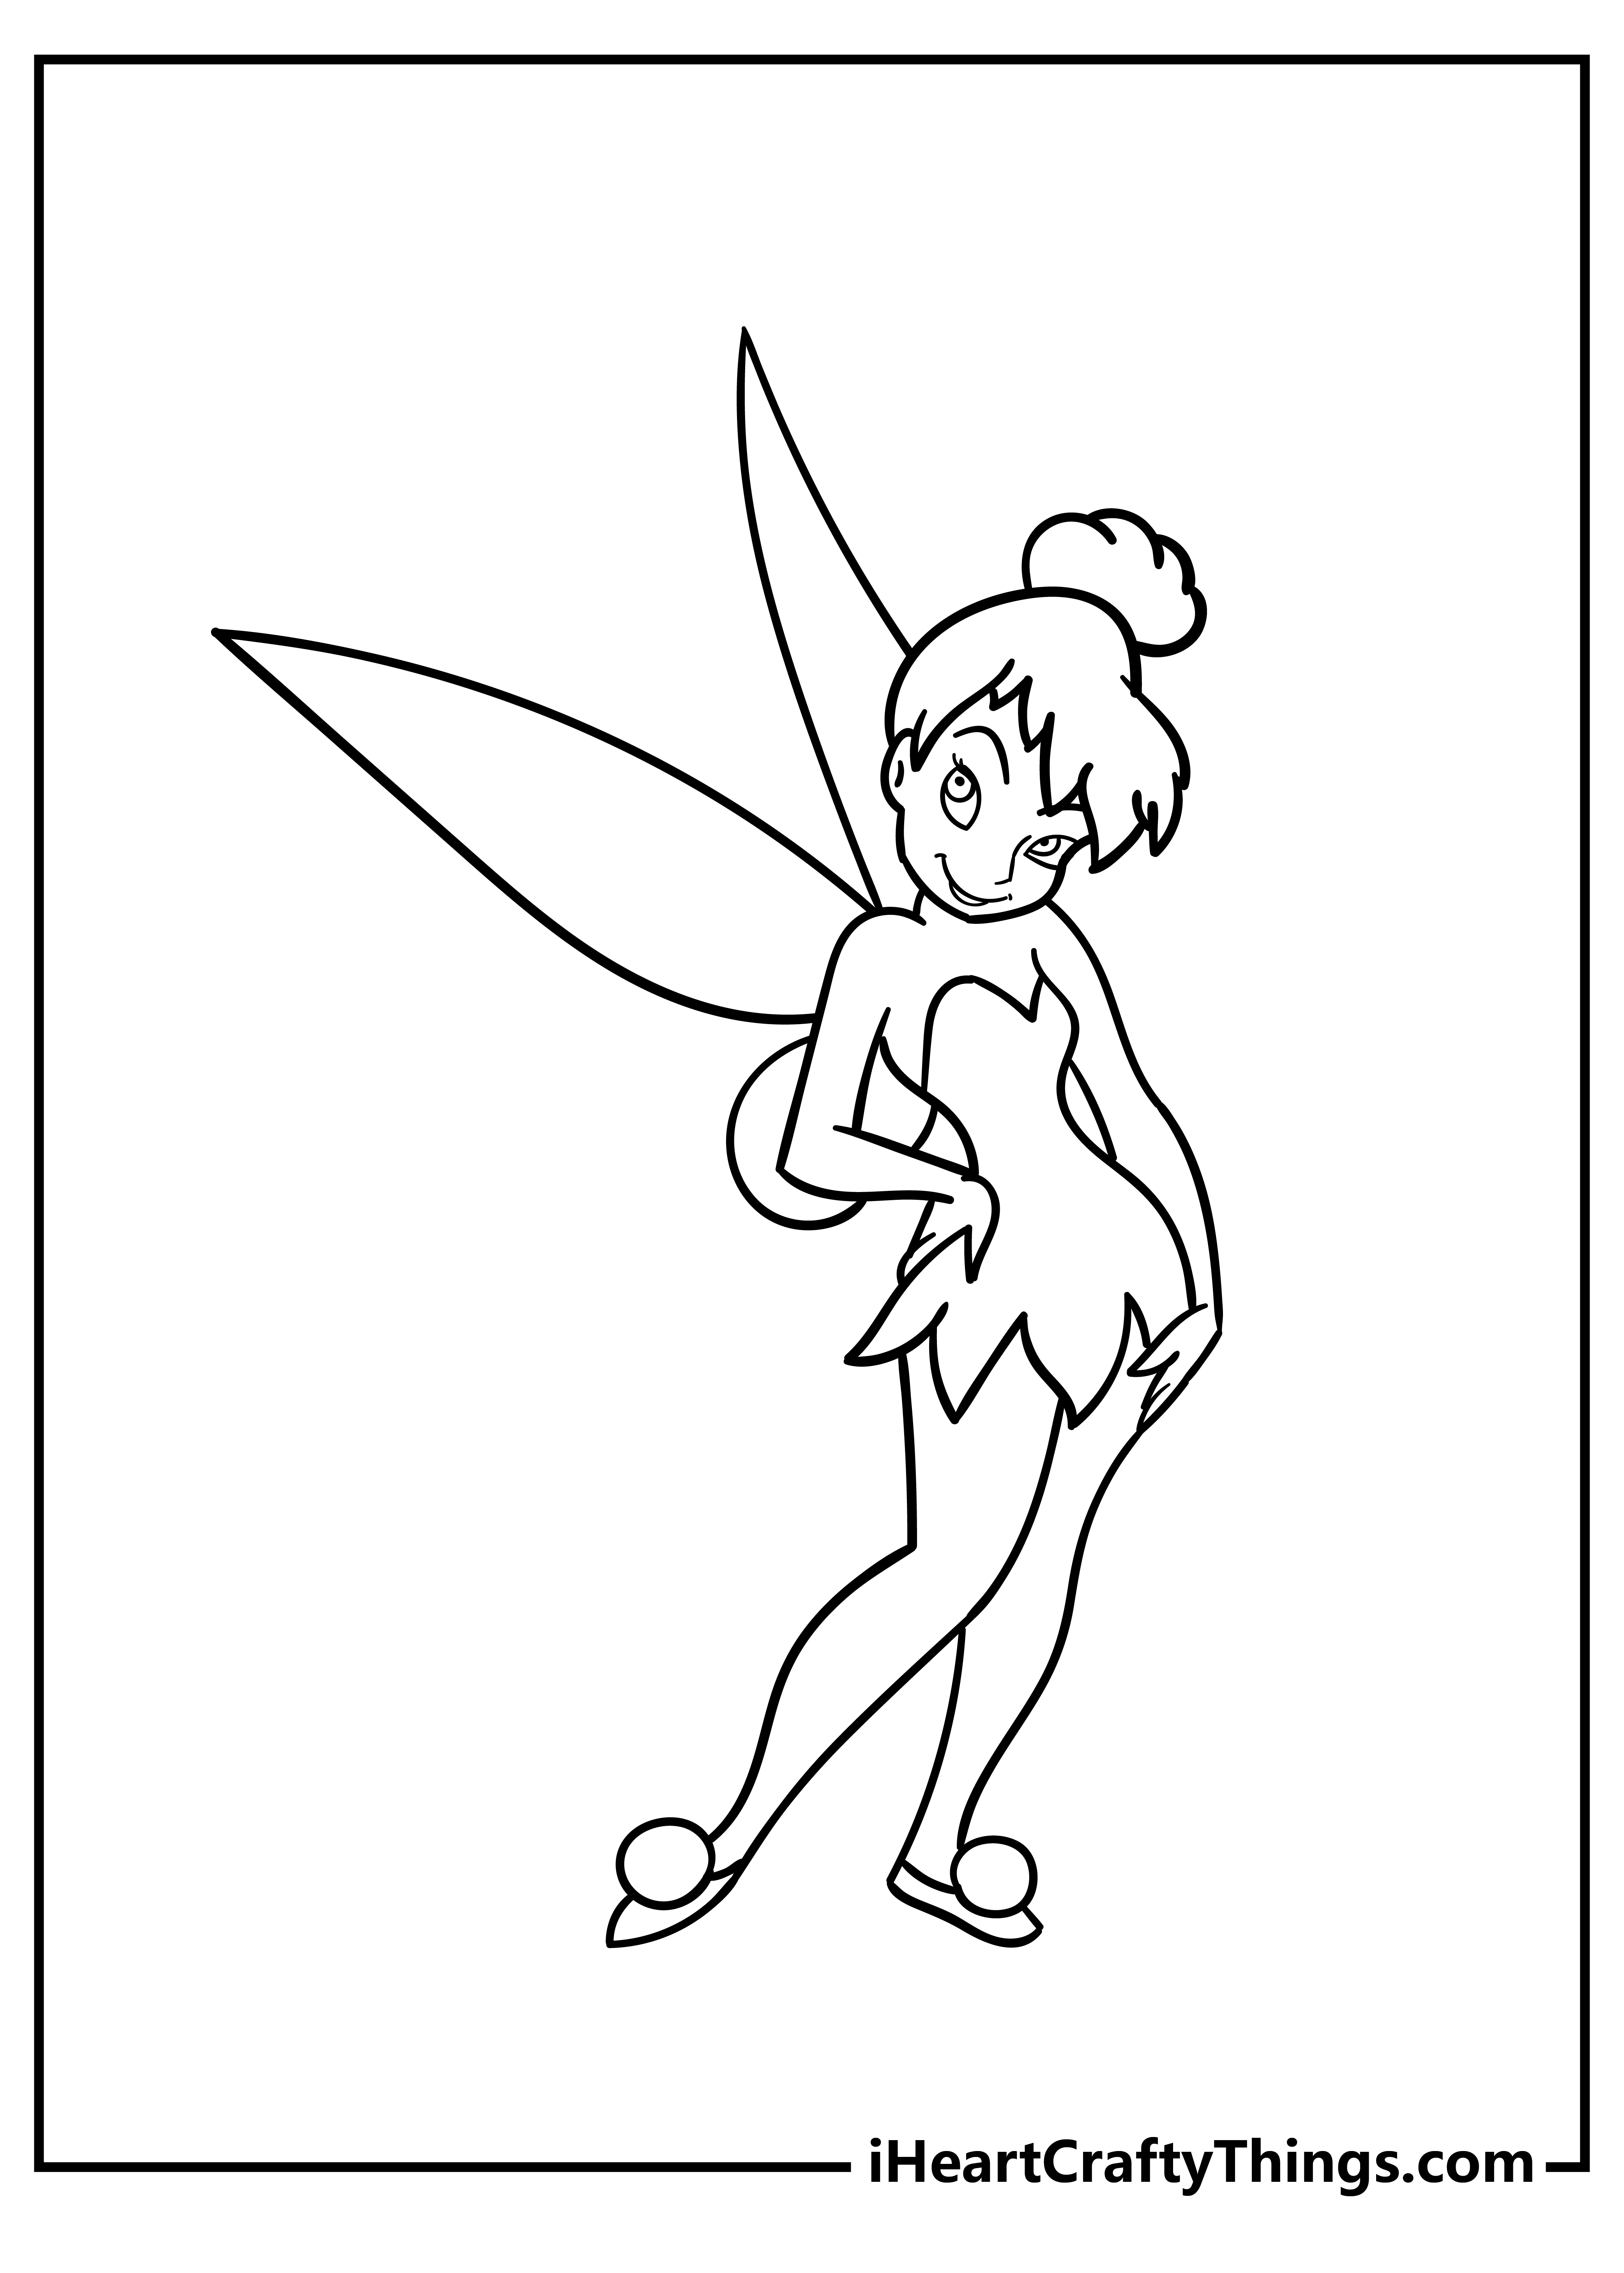 Tinkerbell Coloring Pages for preschoolers free printable